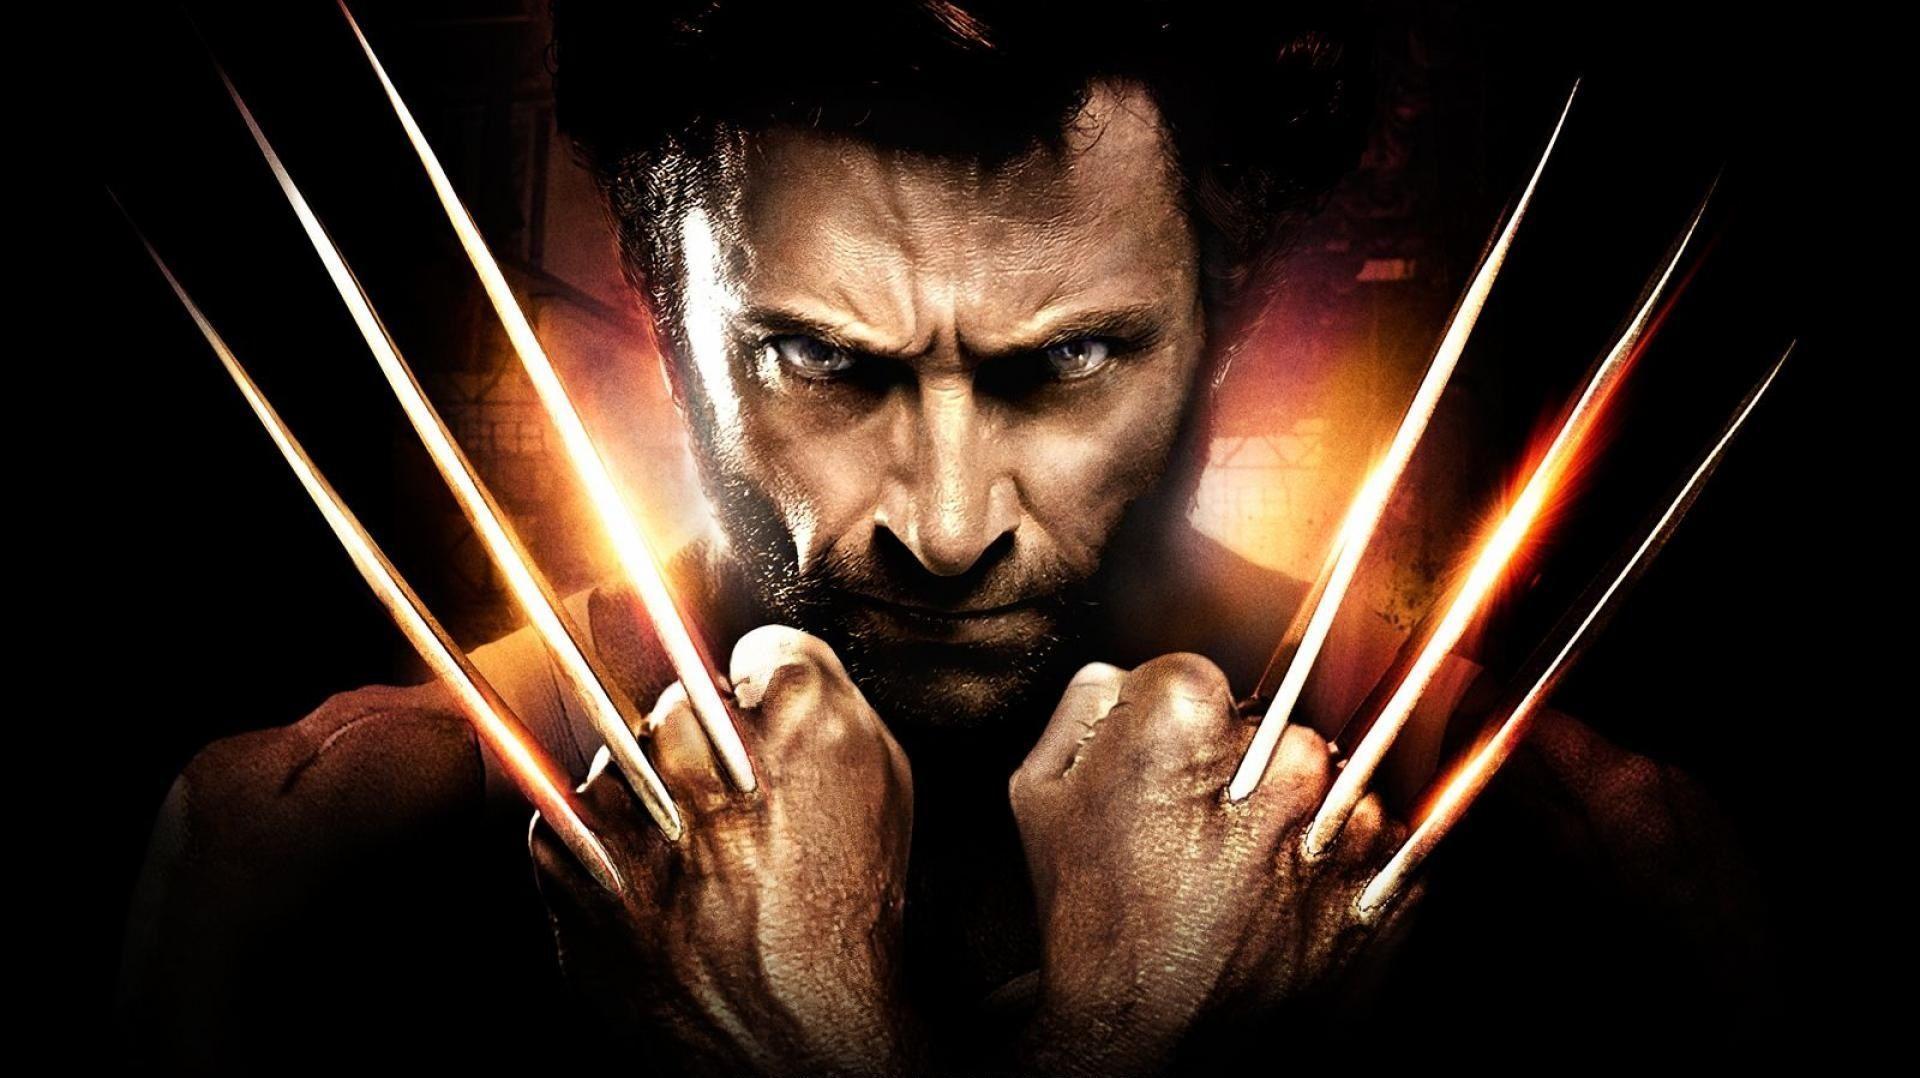 Download 2015 The Wolverine 3D Wallpaper For Android. HD